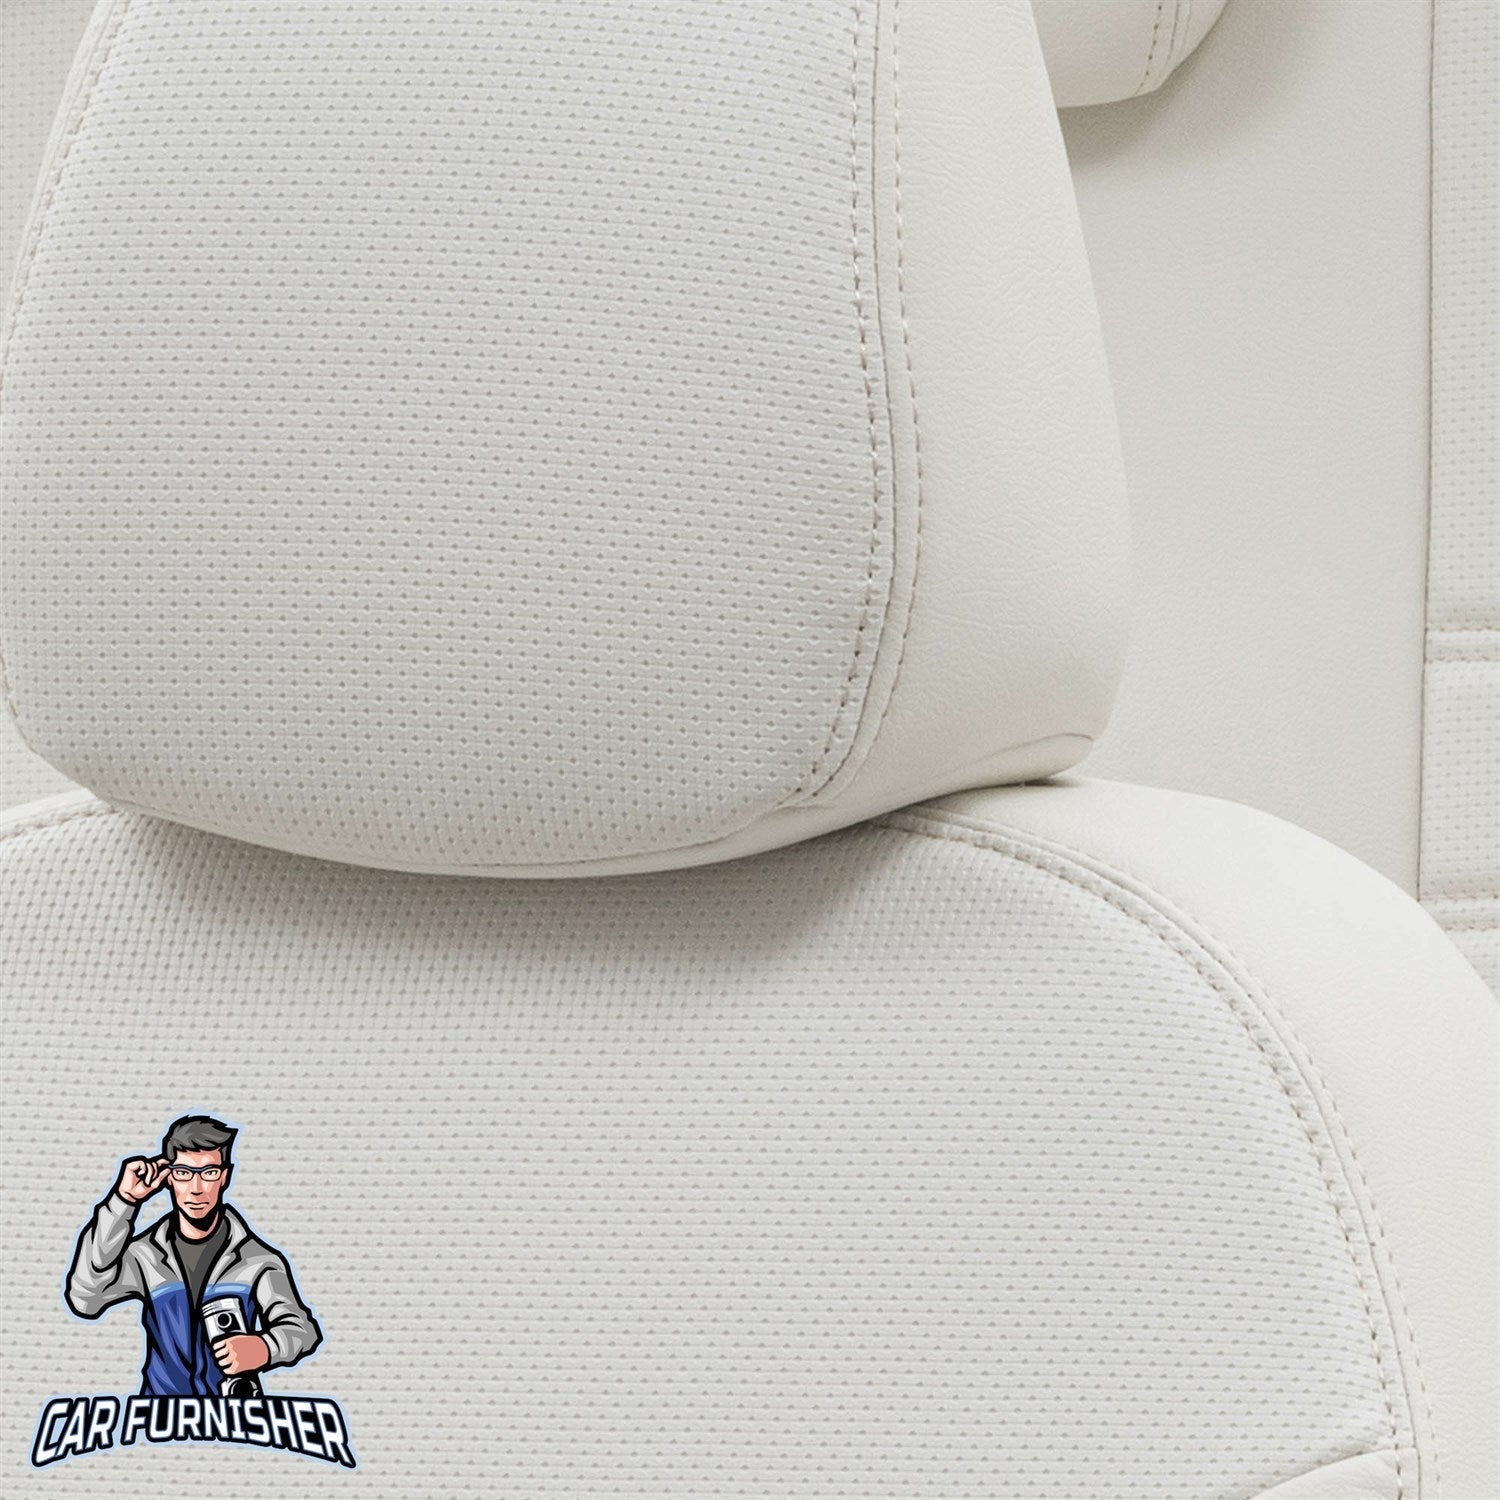 Ford Transit Custom Seat Covers New York Leather Design Ivory Leather